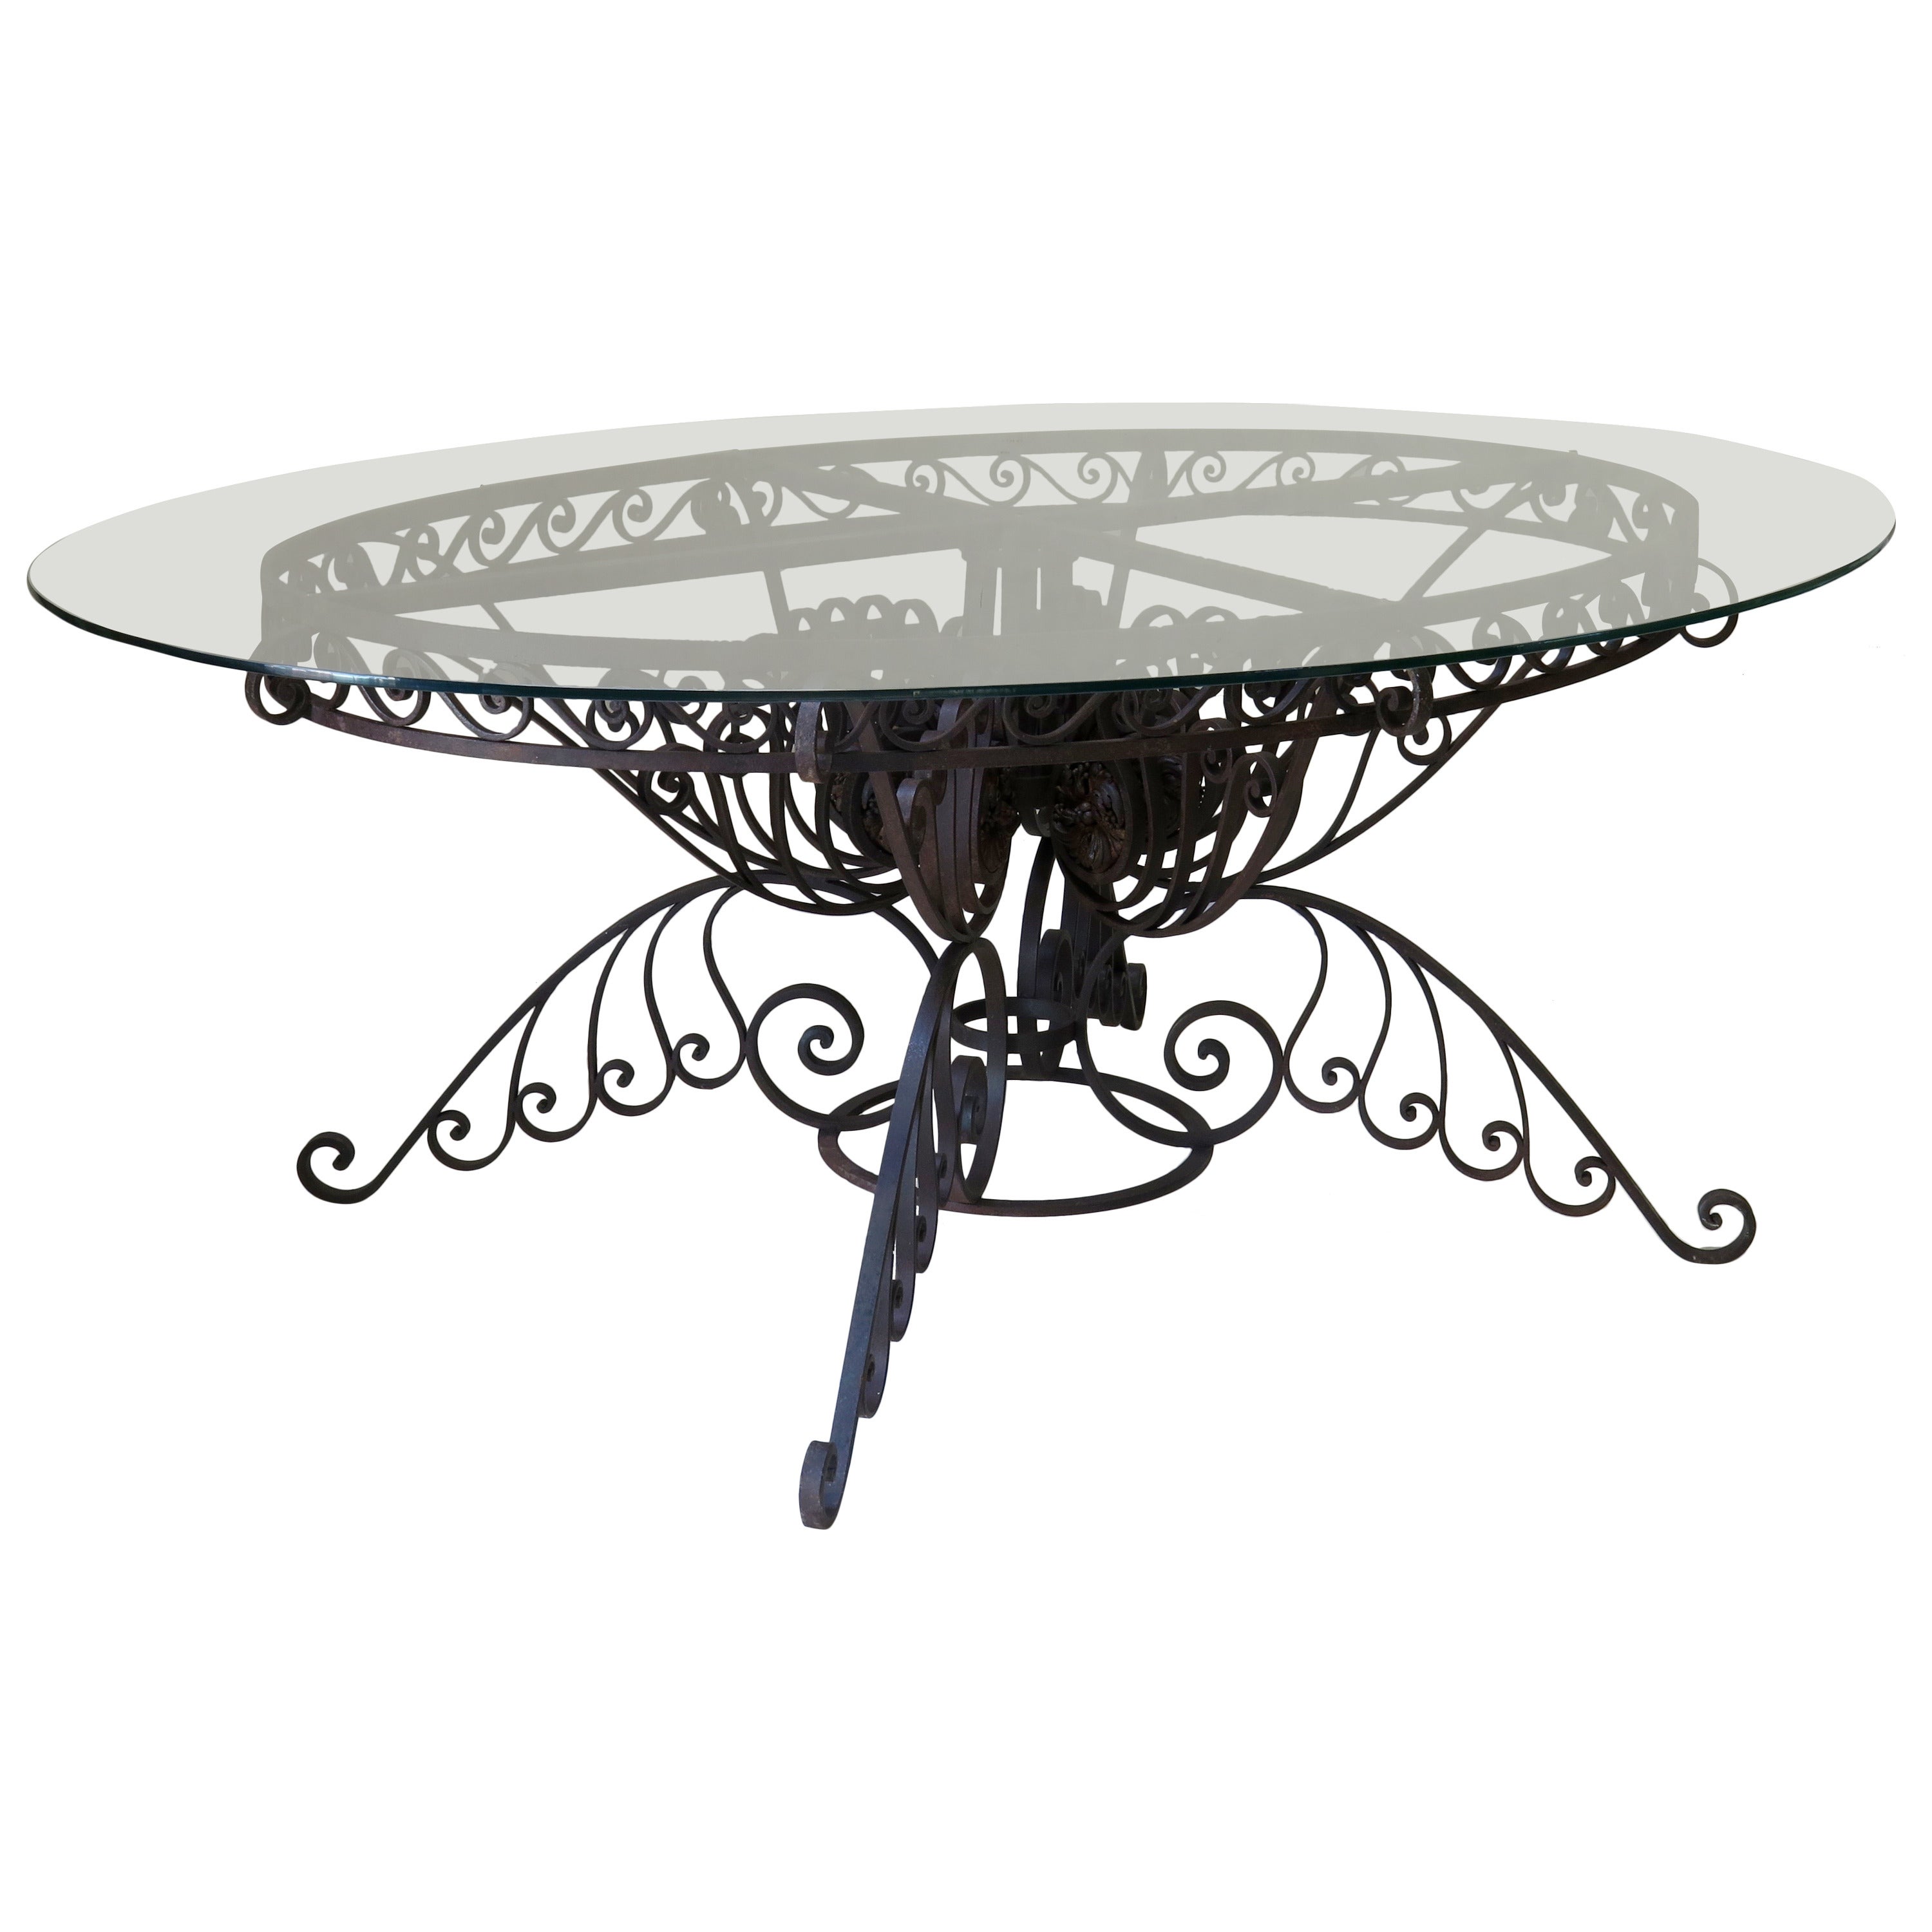 Spectacular Oval Wrought Iron Art Deco Dining Table, France, 1930s